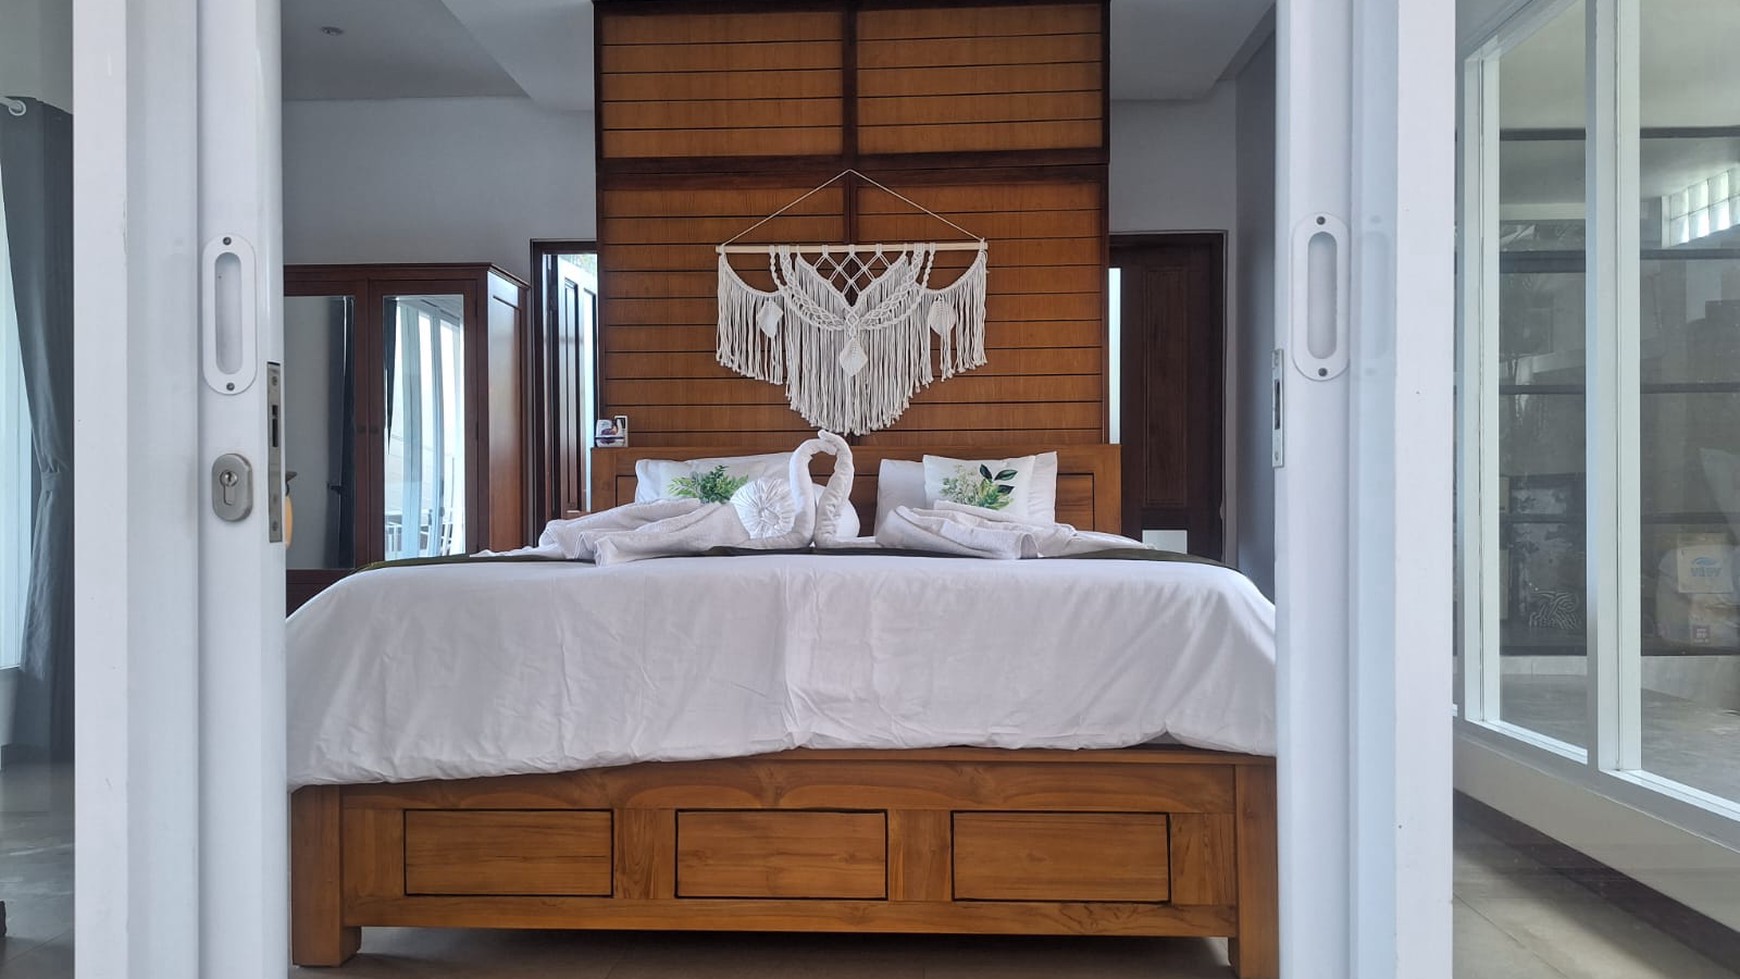 For Rent Yearly - Modern villa fully furnished area Canggu